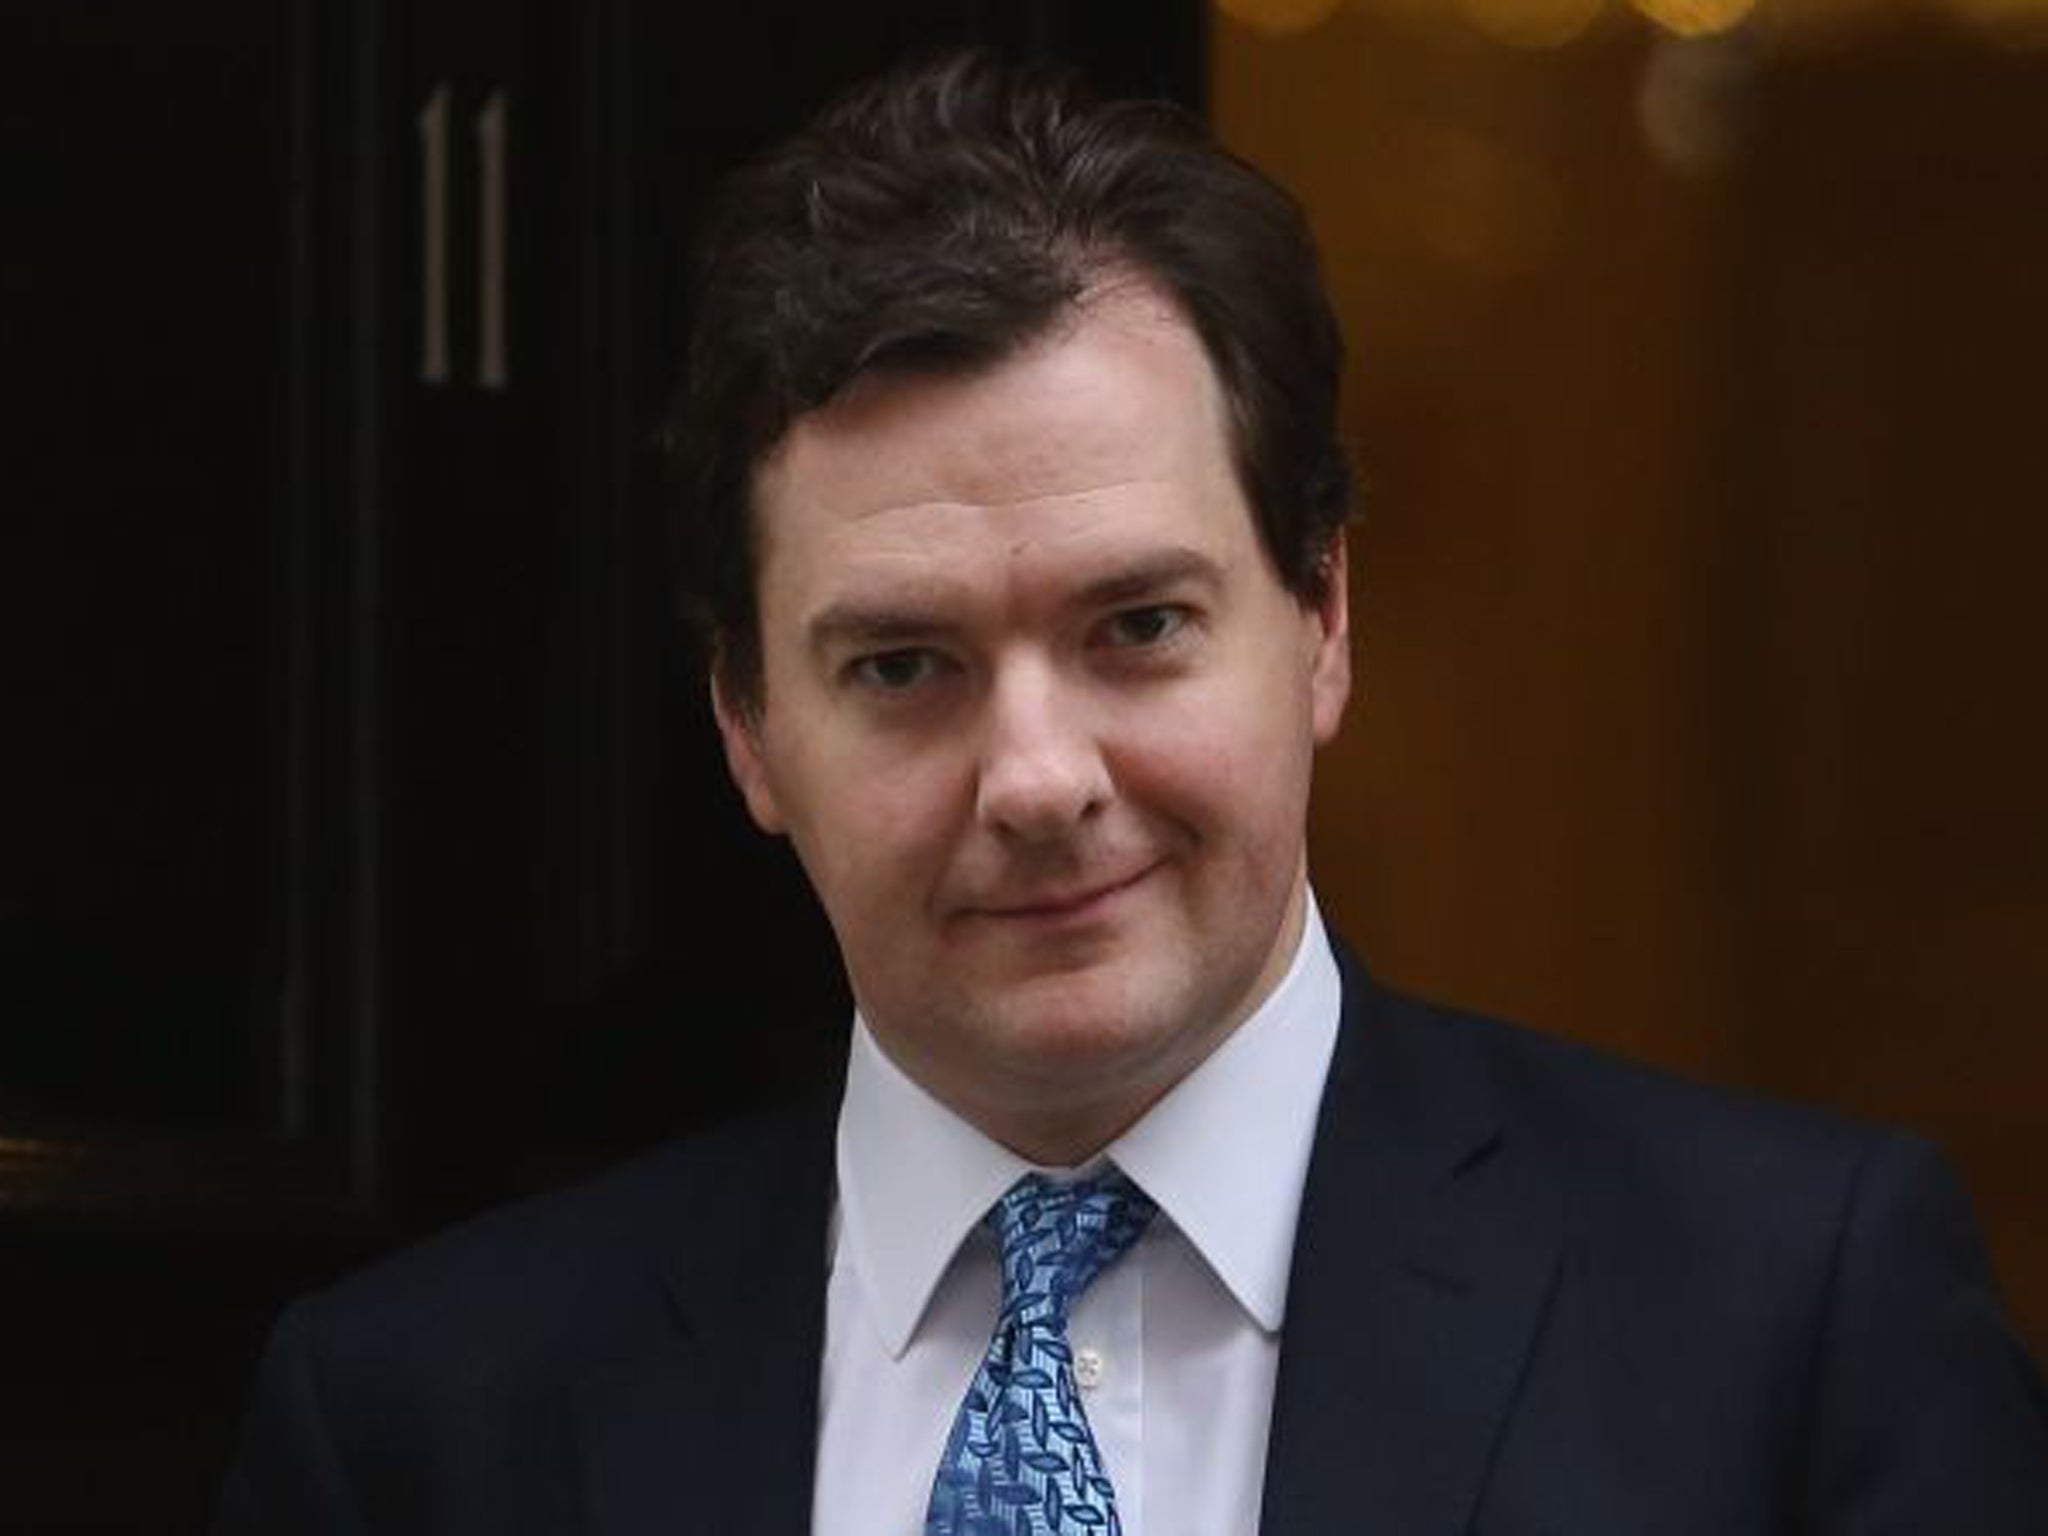 George Osborne has become the first senior Government member to raise publicly the prospect of British withdrawal